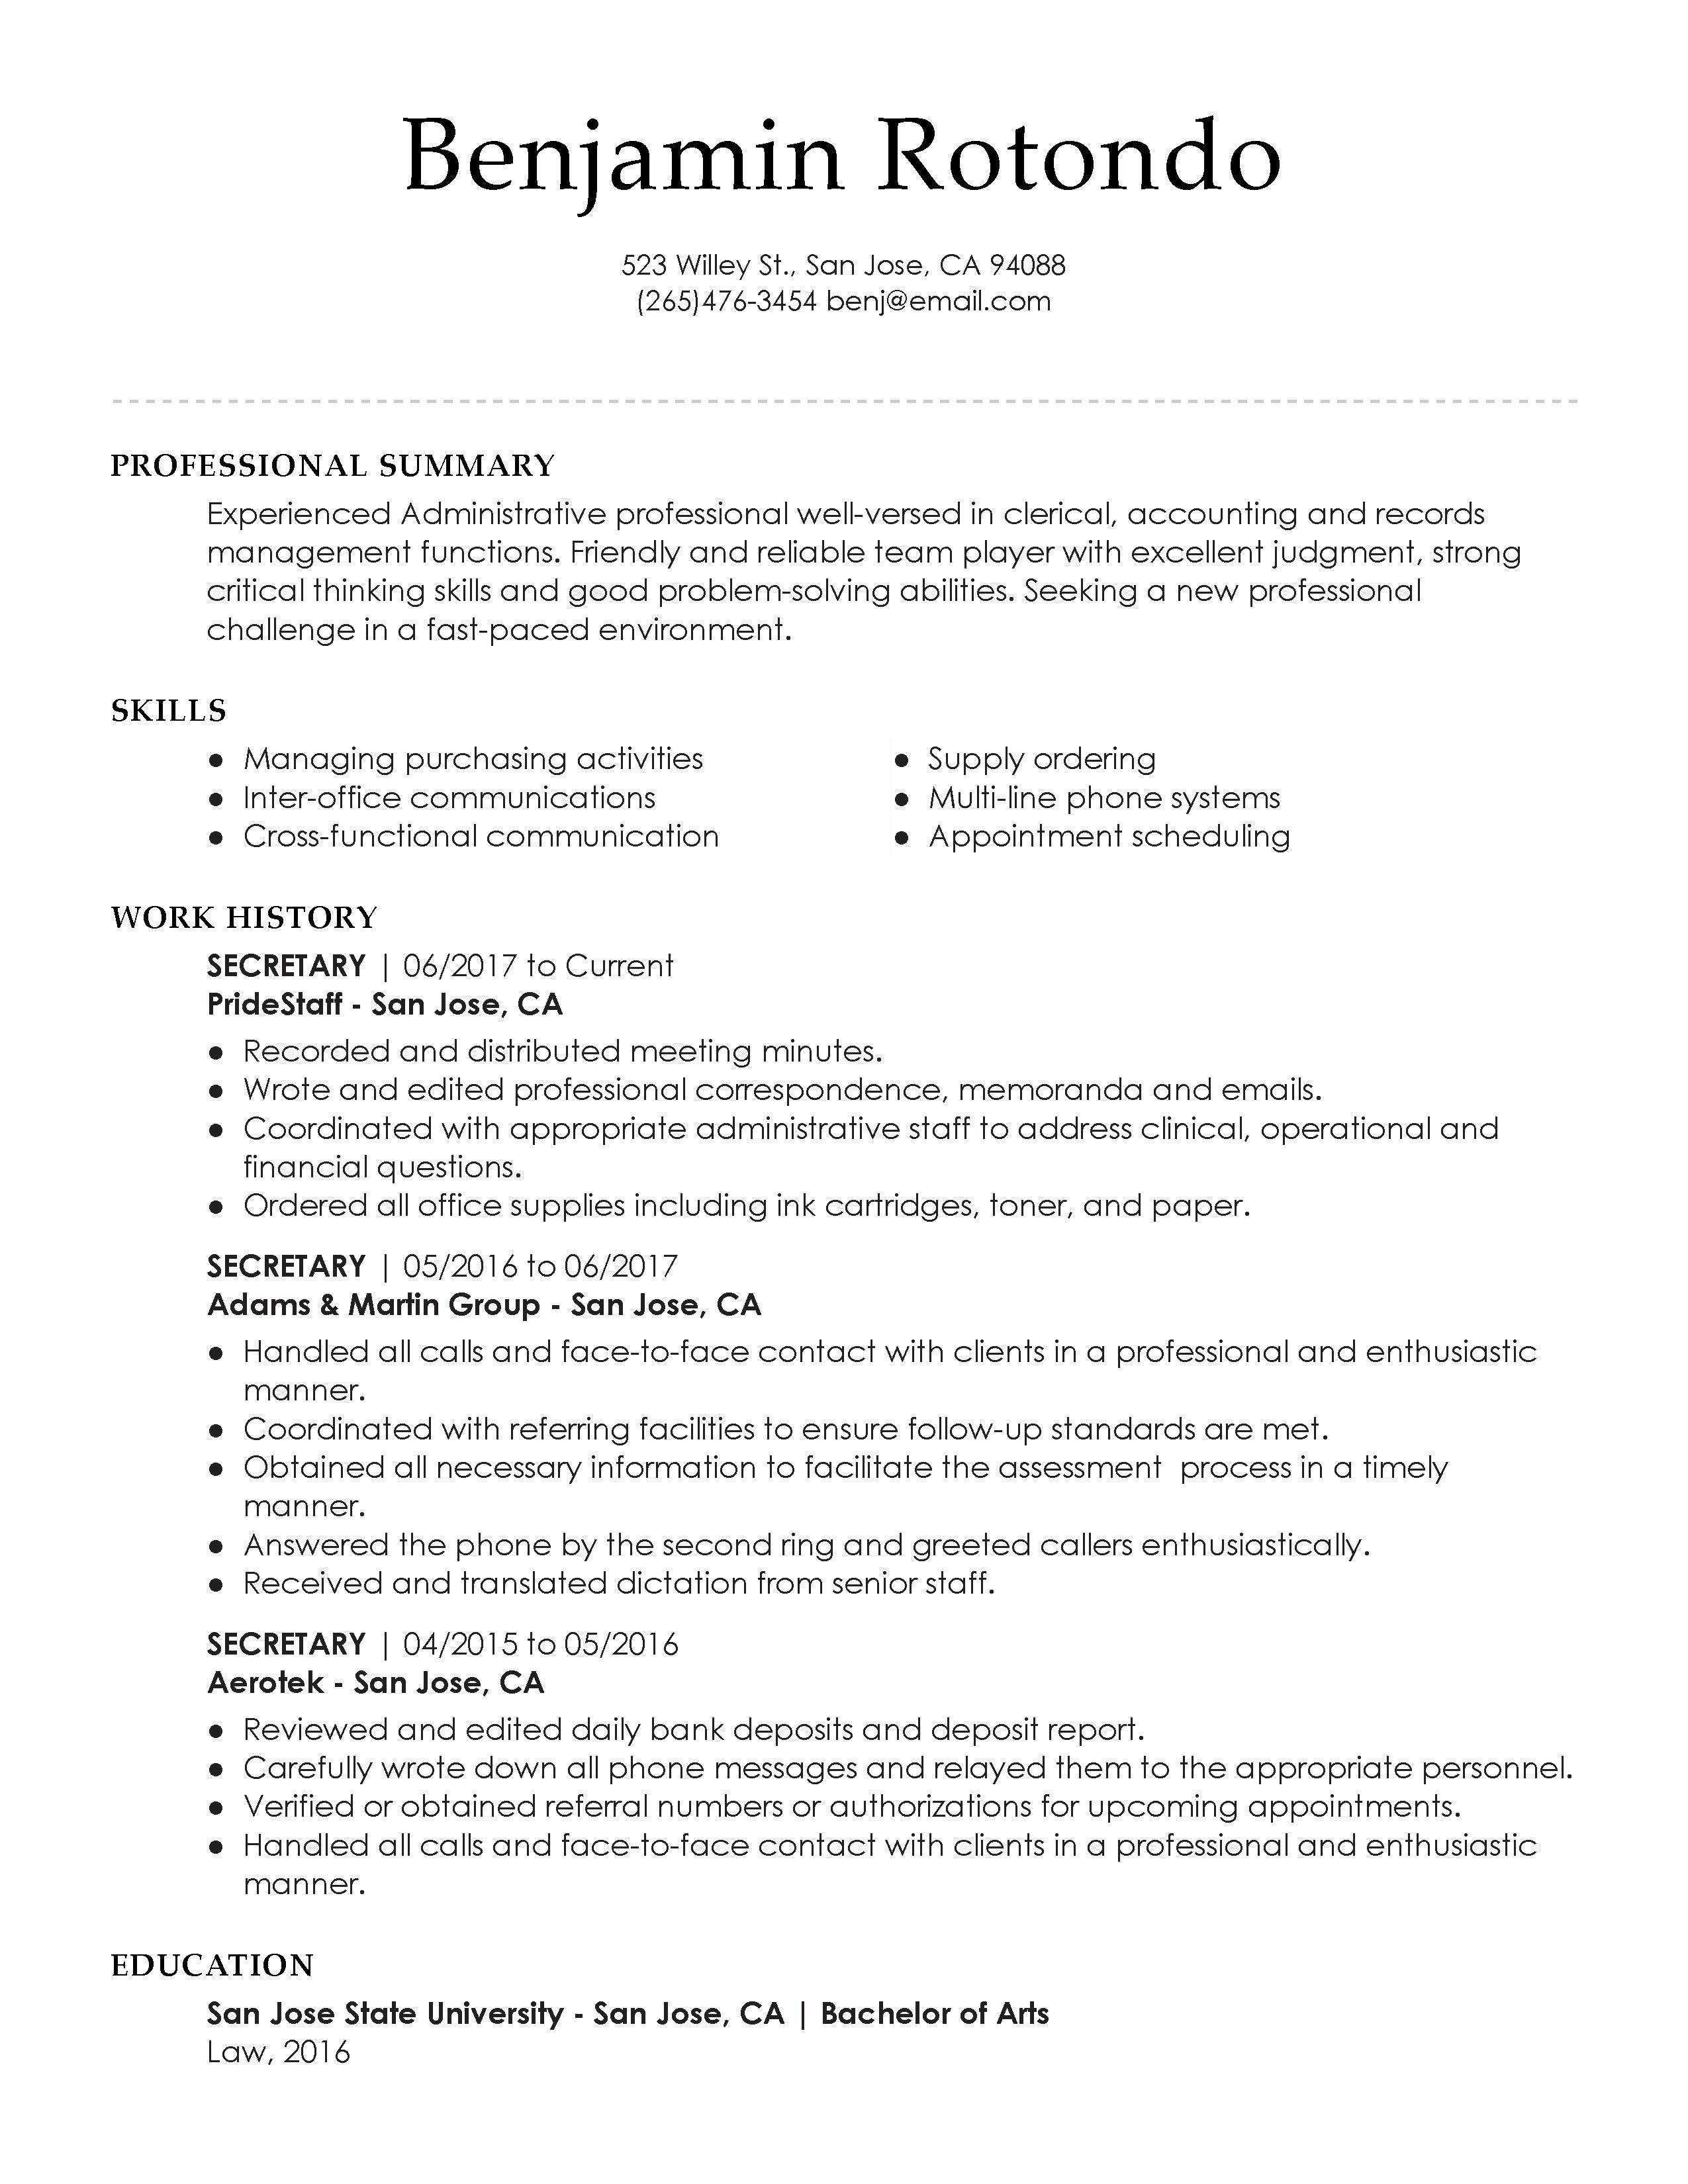 Resume Summary Examples View 30 Samples Of Resumes Industry Experience Level